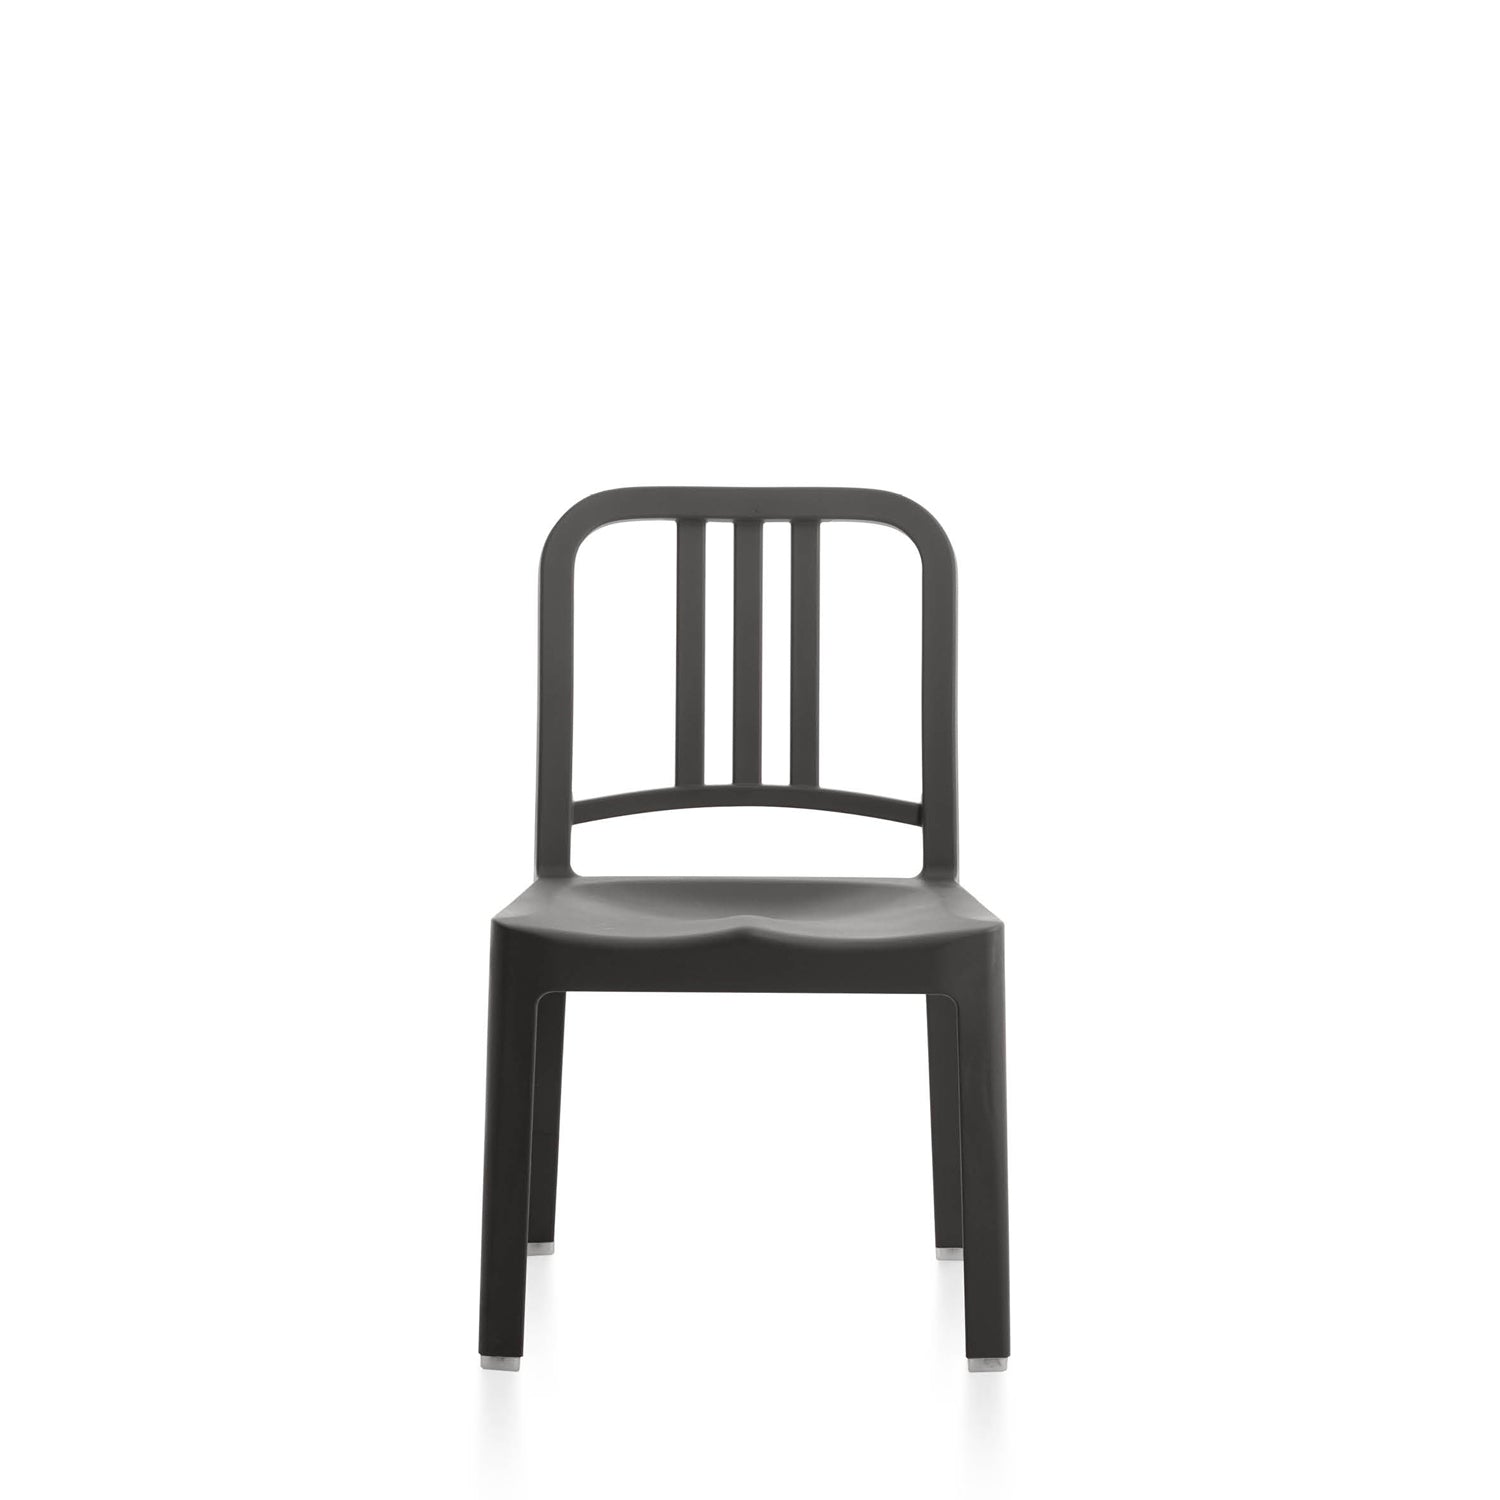 111 Navy Mini Recycled Chair